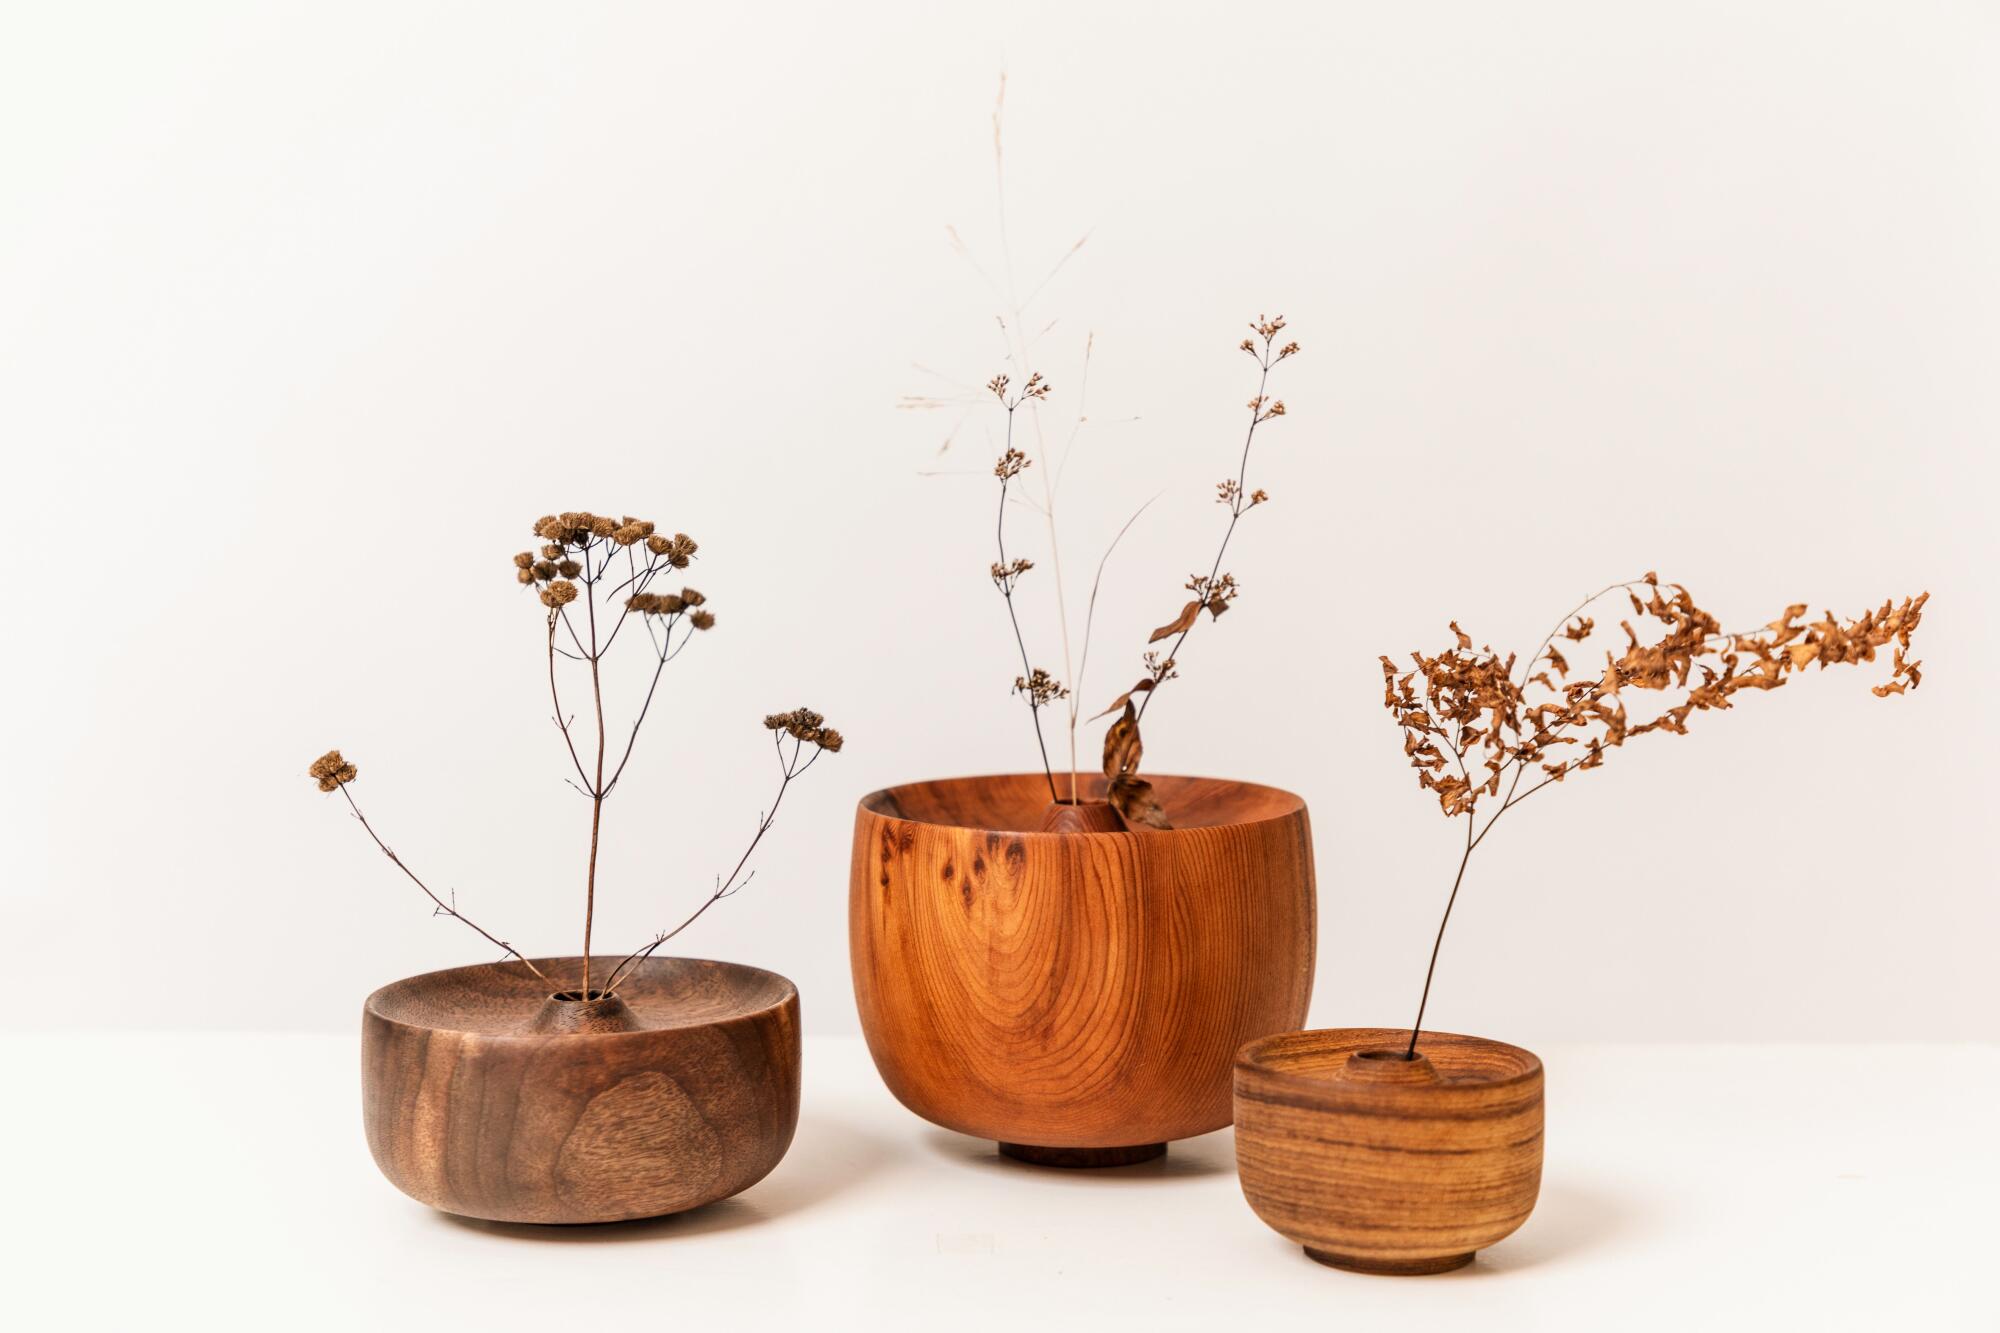 Wood vases with dried flowers.